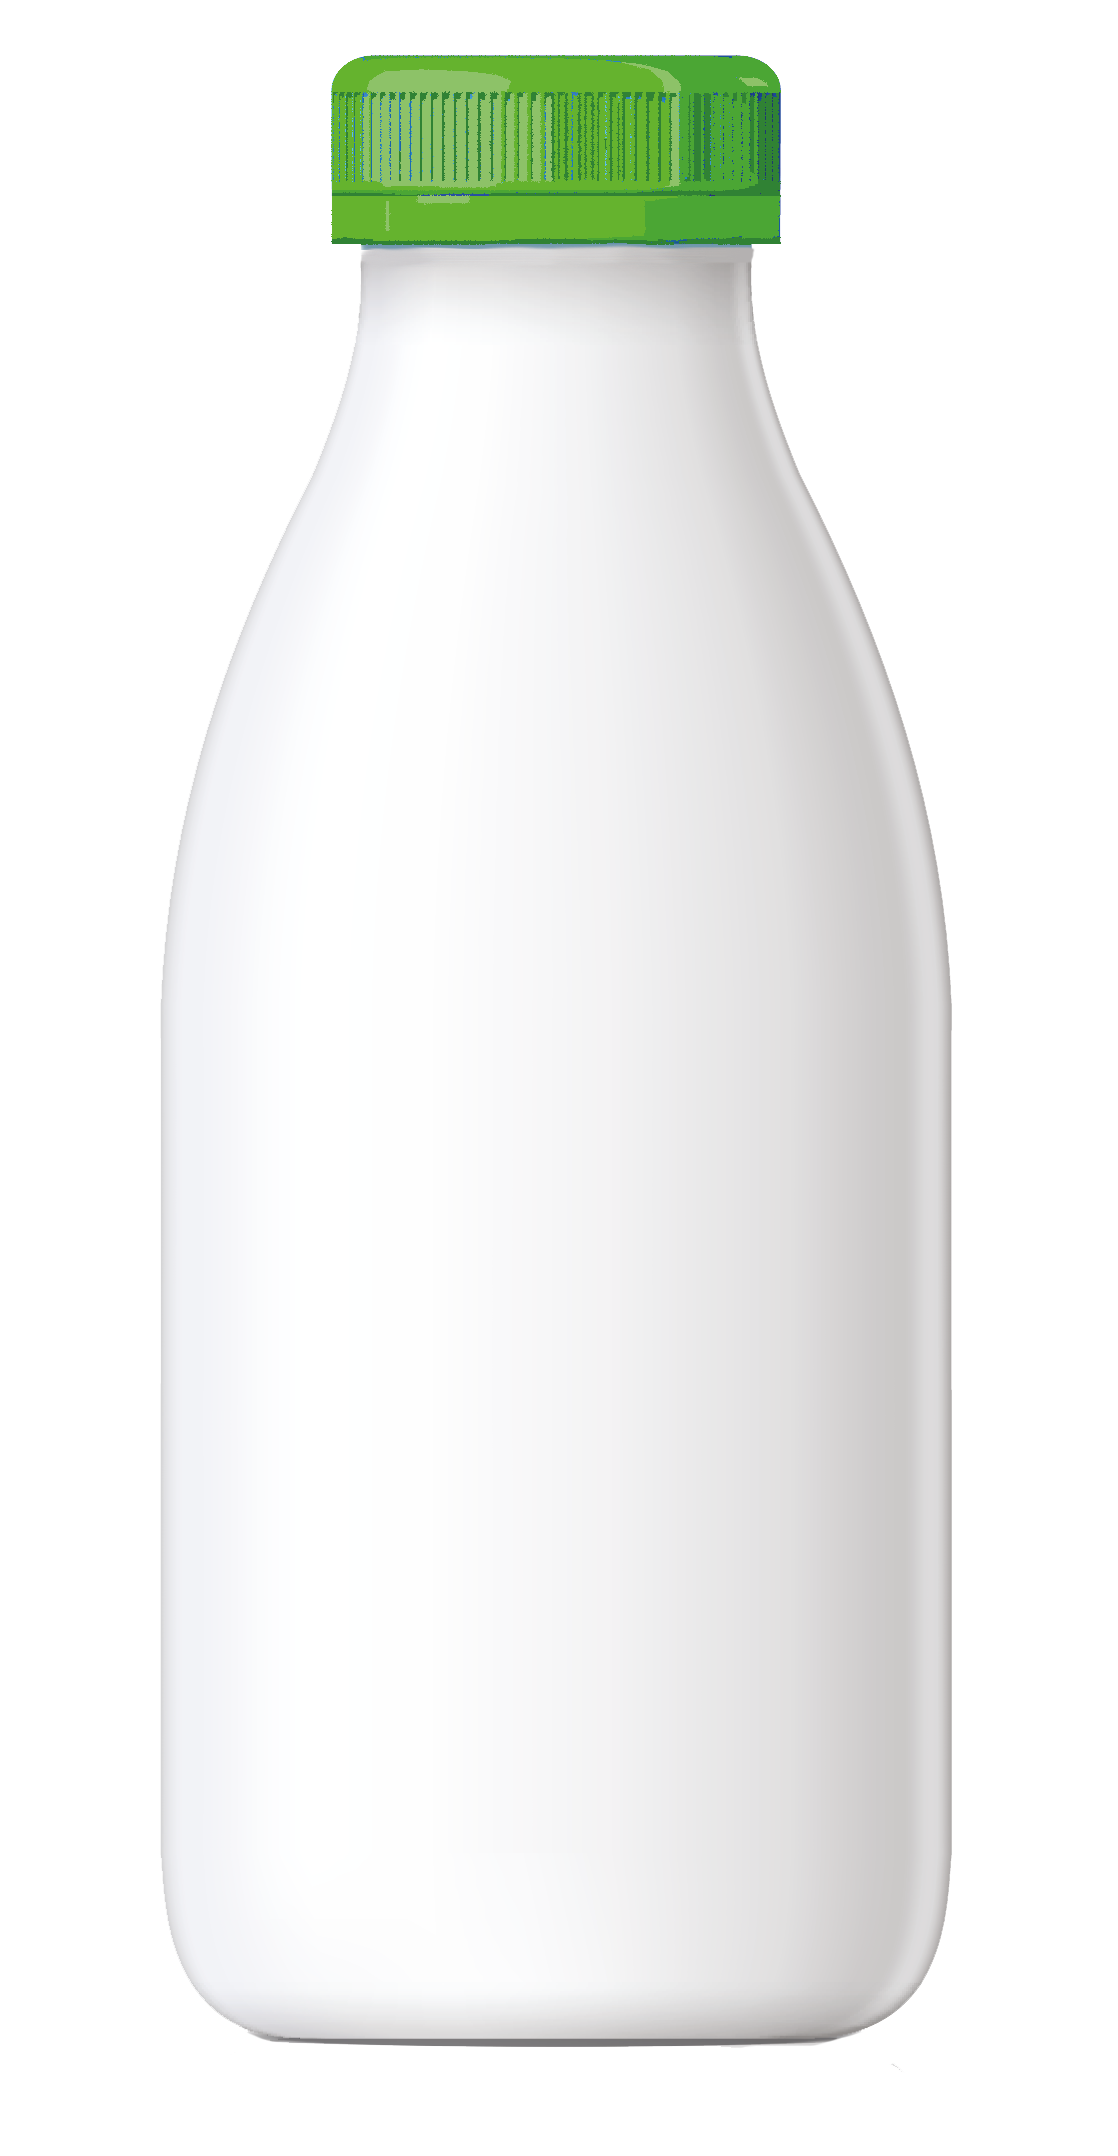 https://www.coolmilk.com/wp-content/uploads/Glass-milk-bottles-are-available-on-your-school-milk-scheme-with-Cool-Milk-depending-on-your-location.png